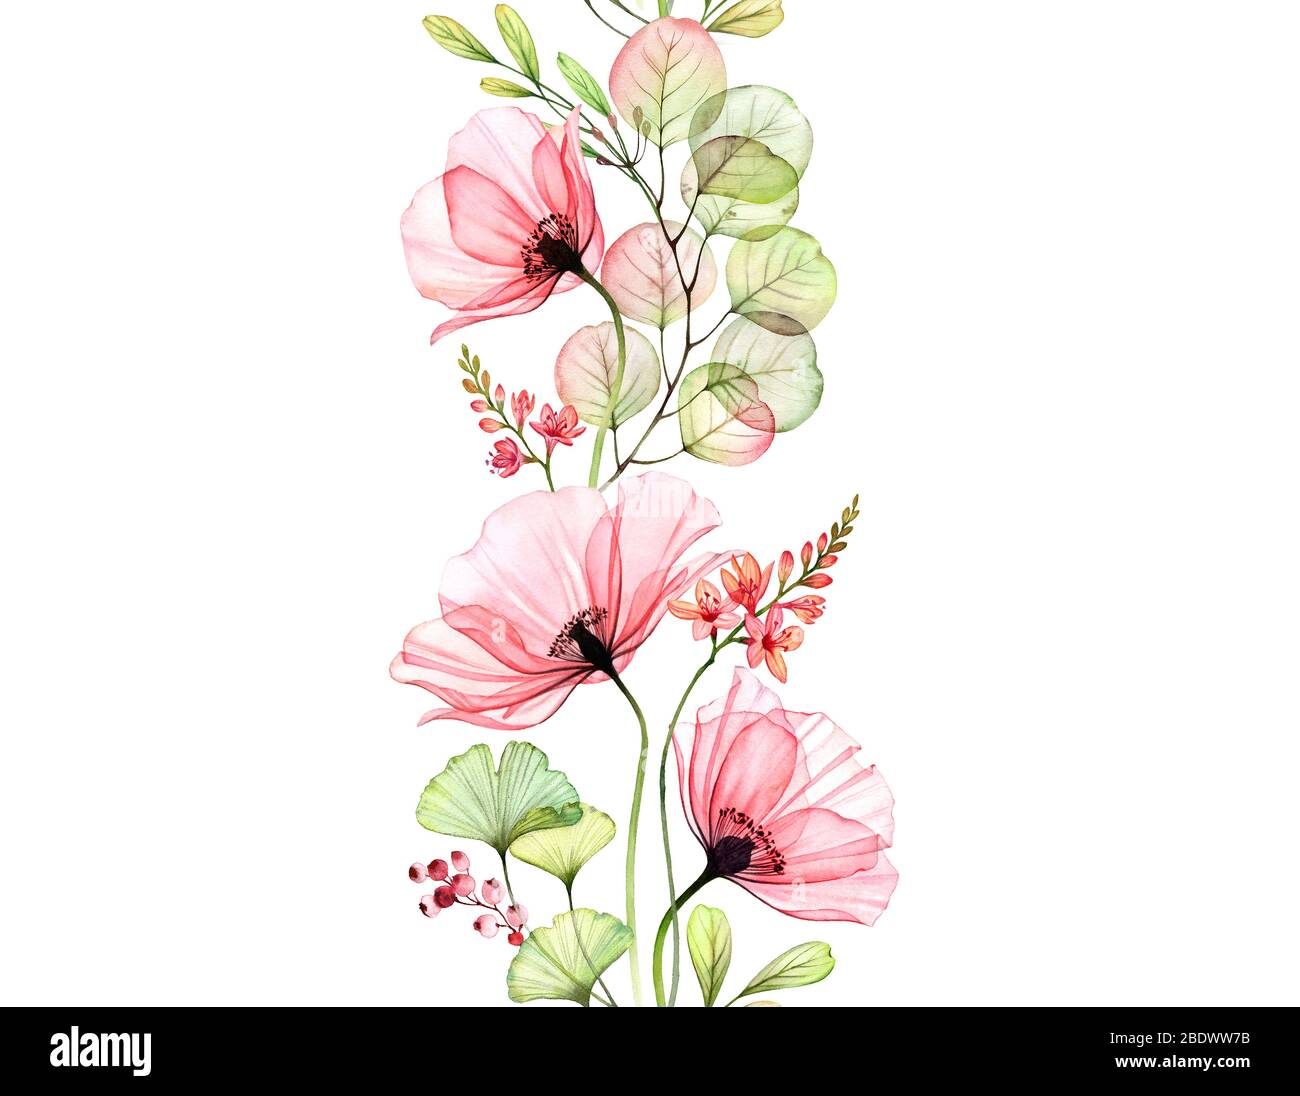 Watercolor Poppy seamless border. Vertical repetitive pattern. Abstract pink flowers with leaves and fresia branches on white. Botanical illustration Stock Photo